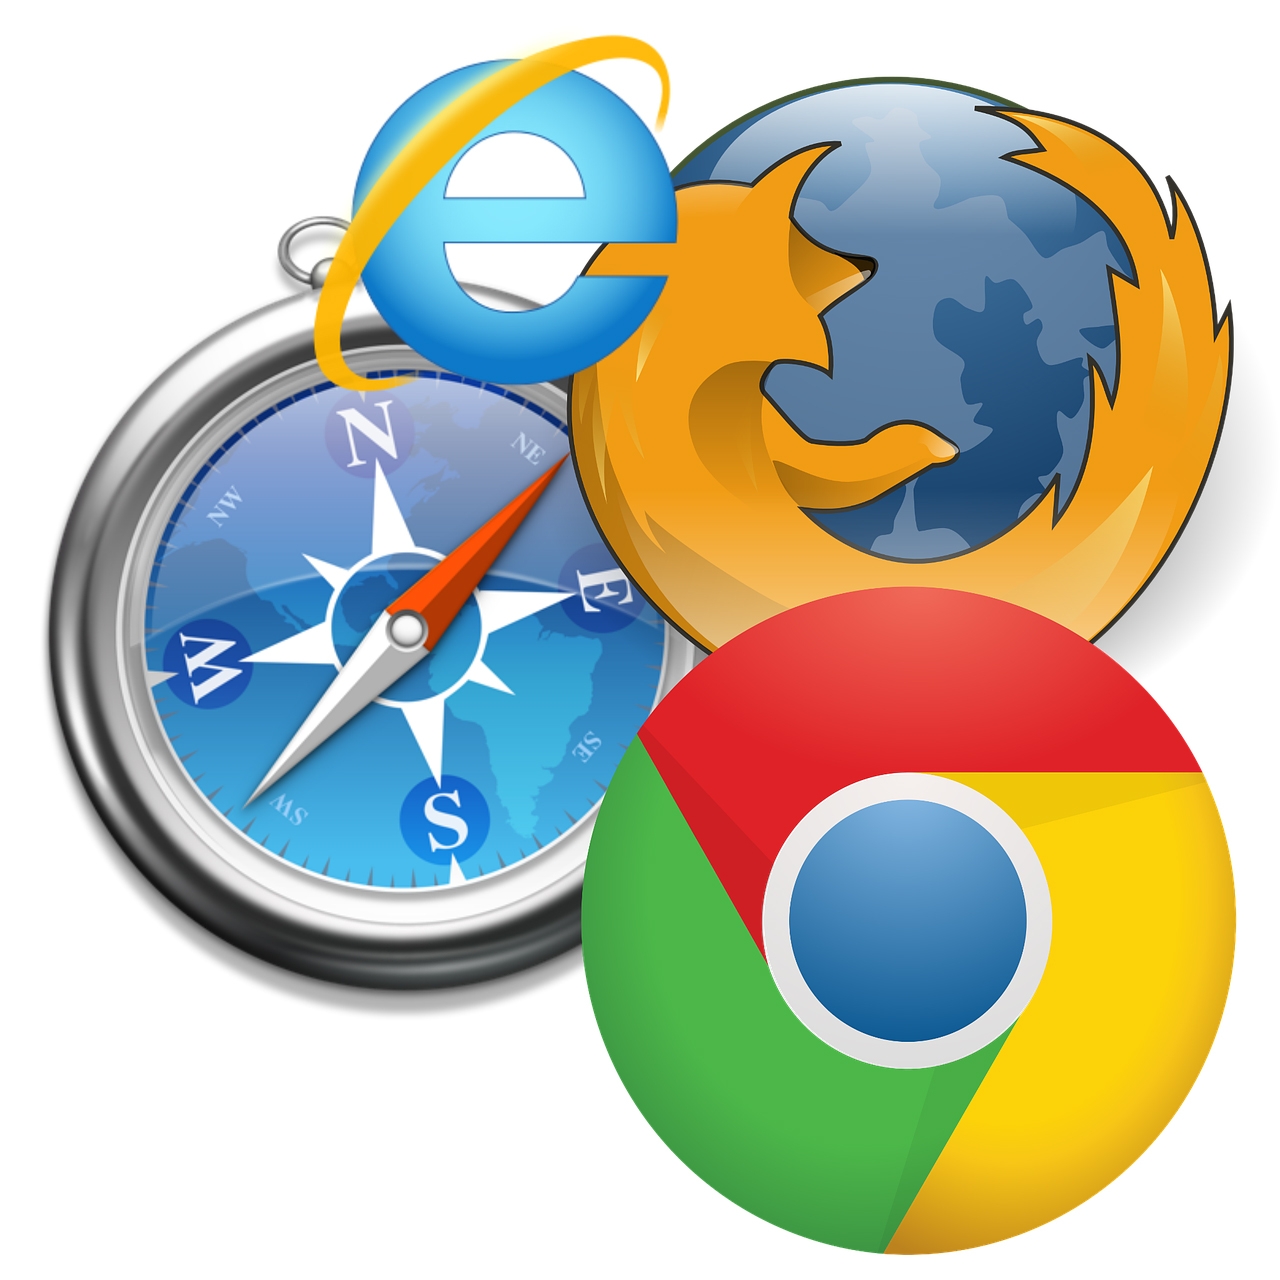 Diverse browsers